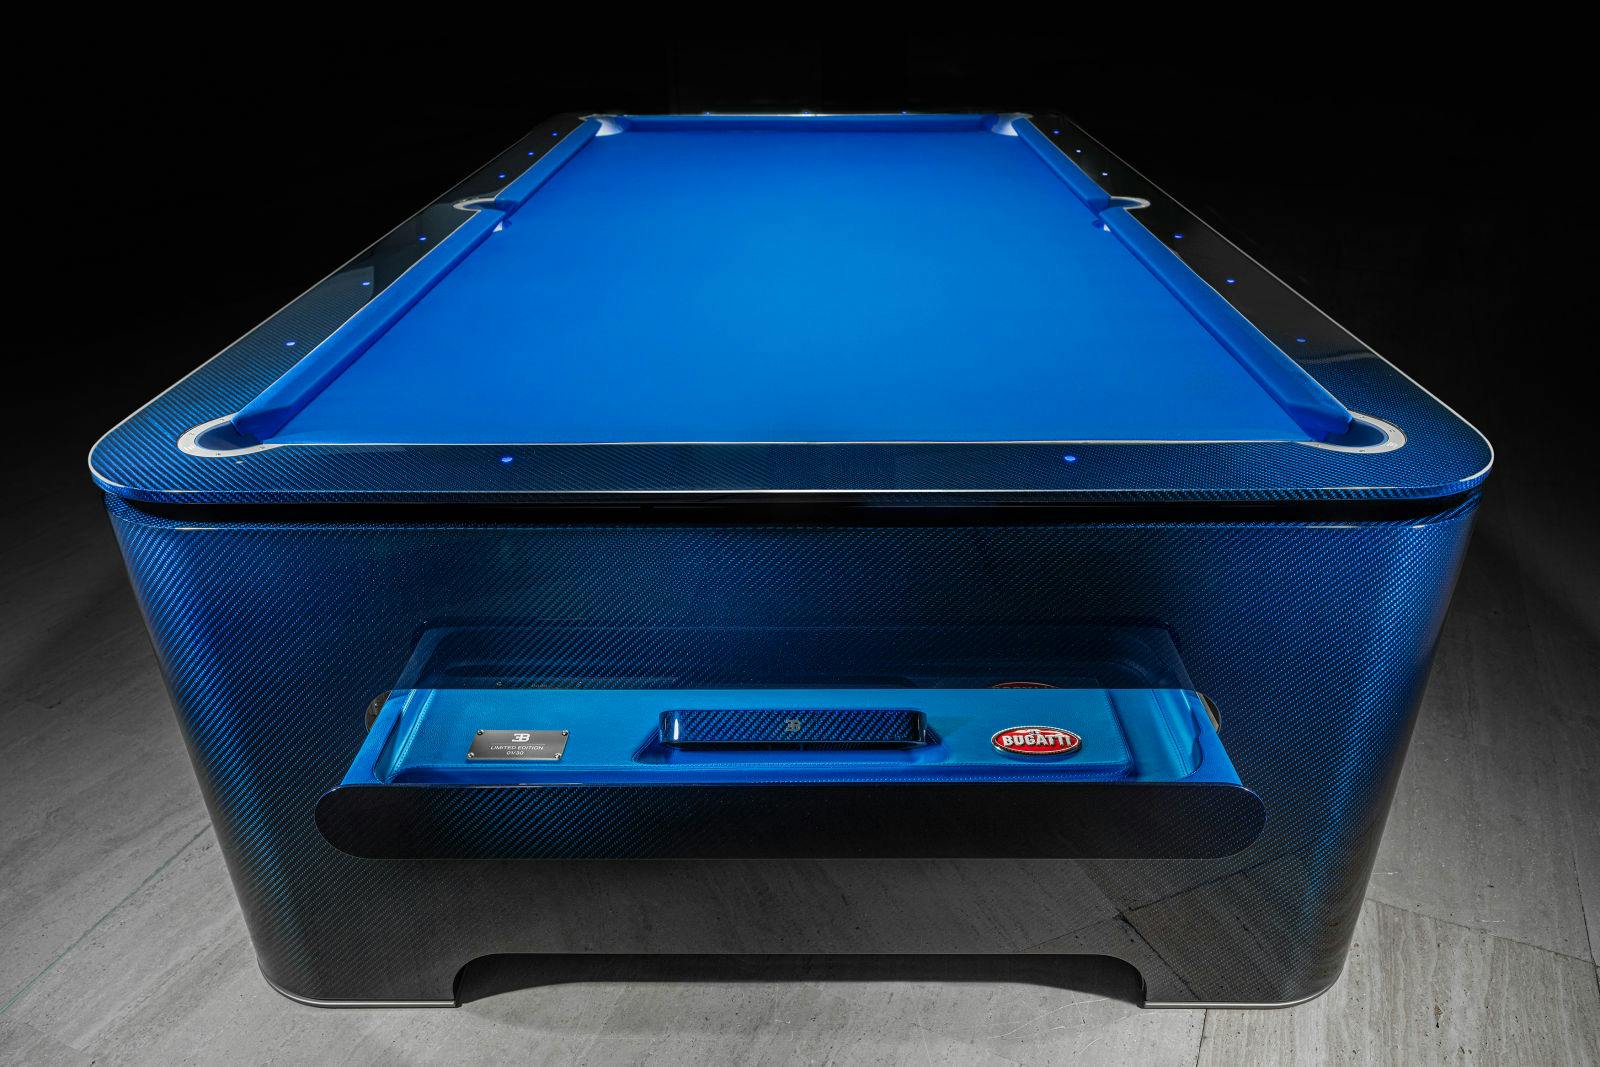 The Bugatti Pool Table – Individually numbered as part of a limited edition